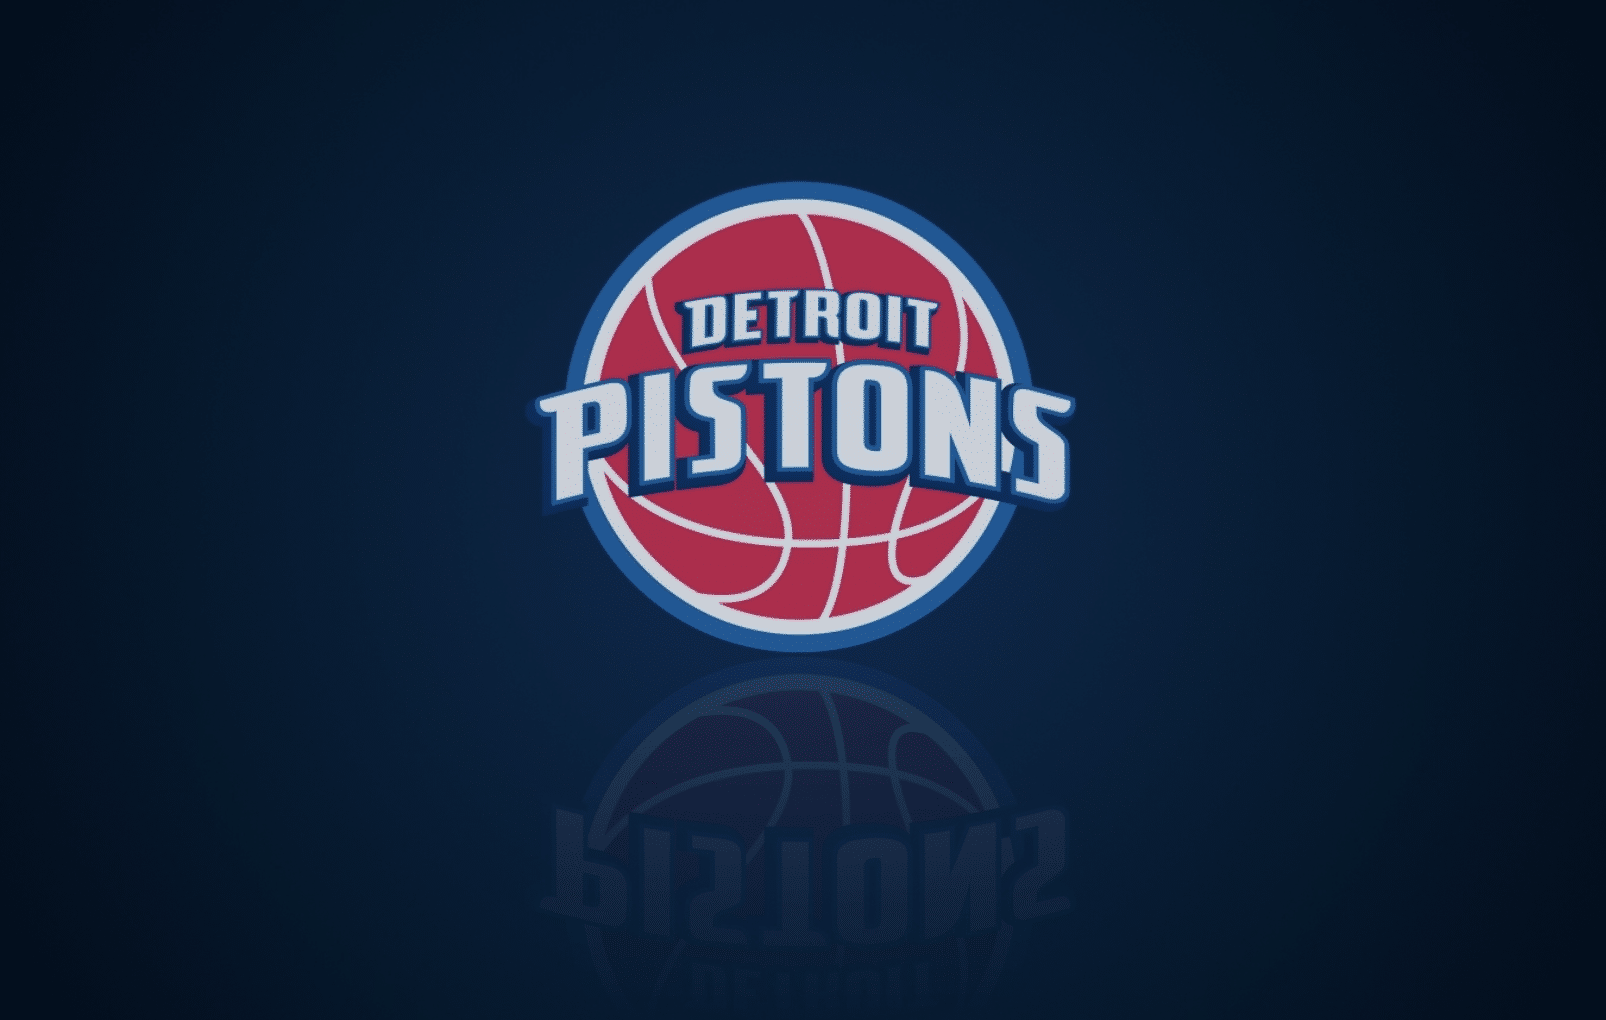 Detroit Pistons face setback Will Bynum Convicted Monty Williams says Detroit Pistons 20th straight loss 'Hurts like you can't believe' NBA Forcing Detroit Pistons to Play Extra Road Game Detroit Pistons finalizing multi-player trade